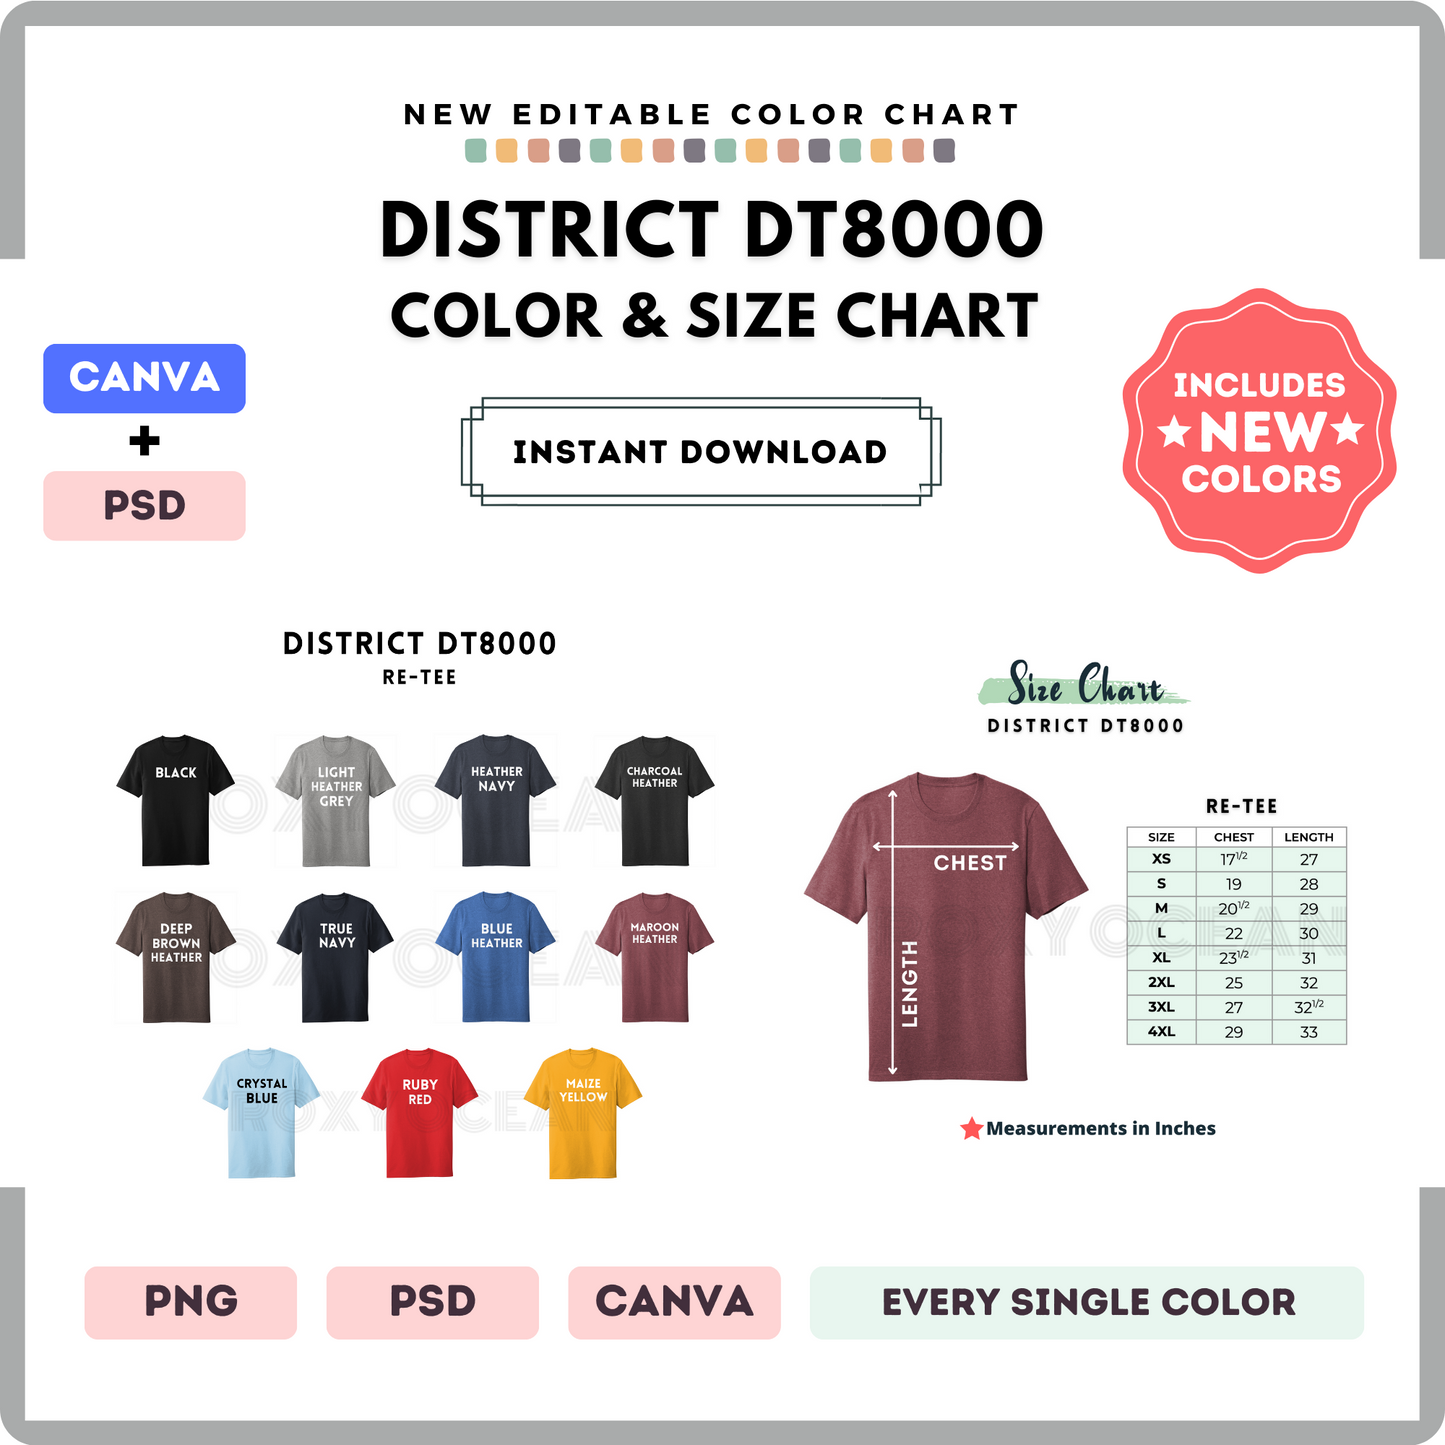 District DT8000 Color and Size Chart